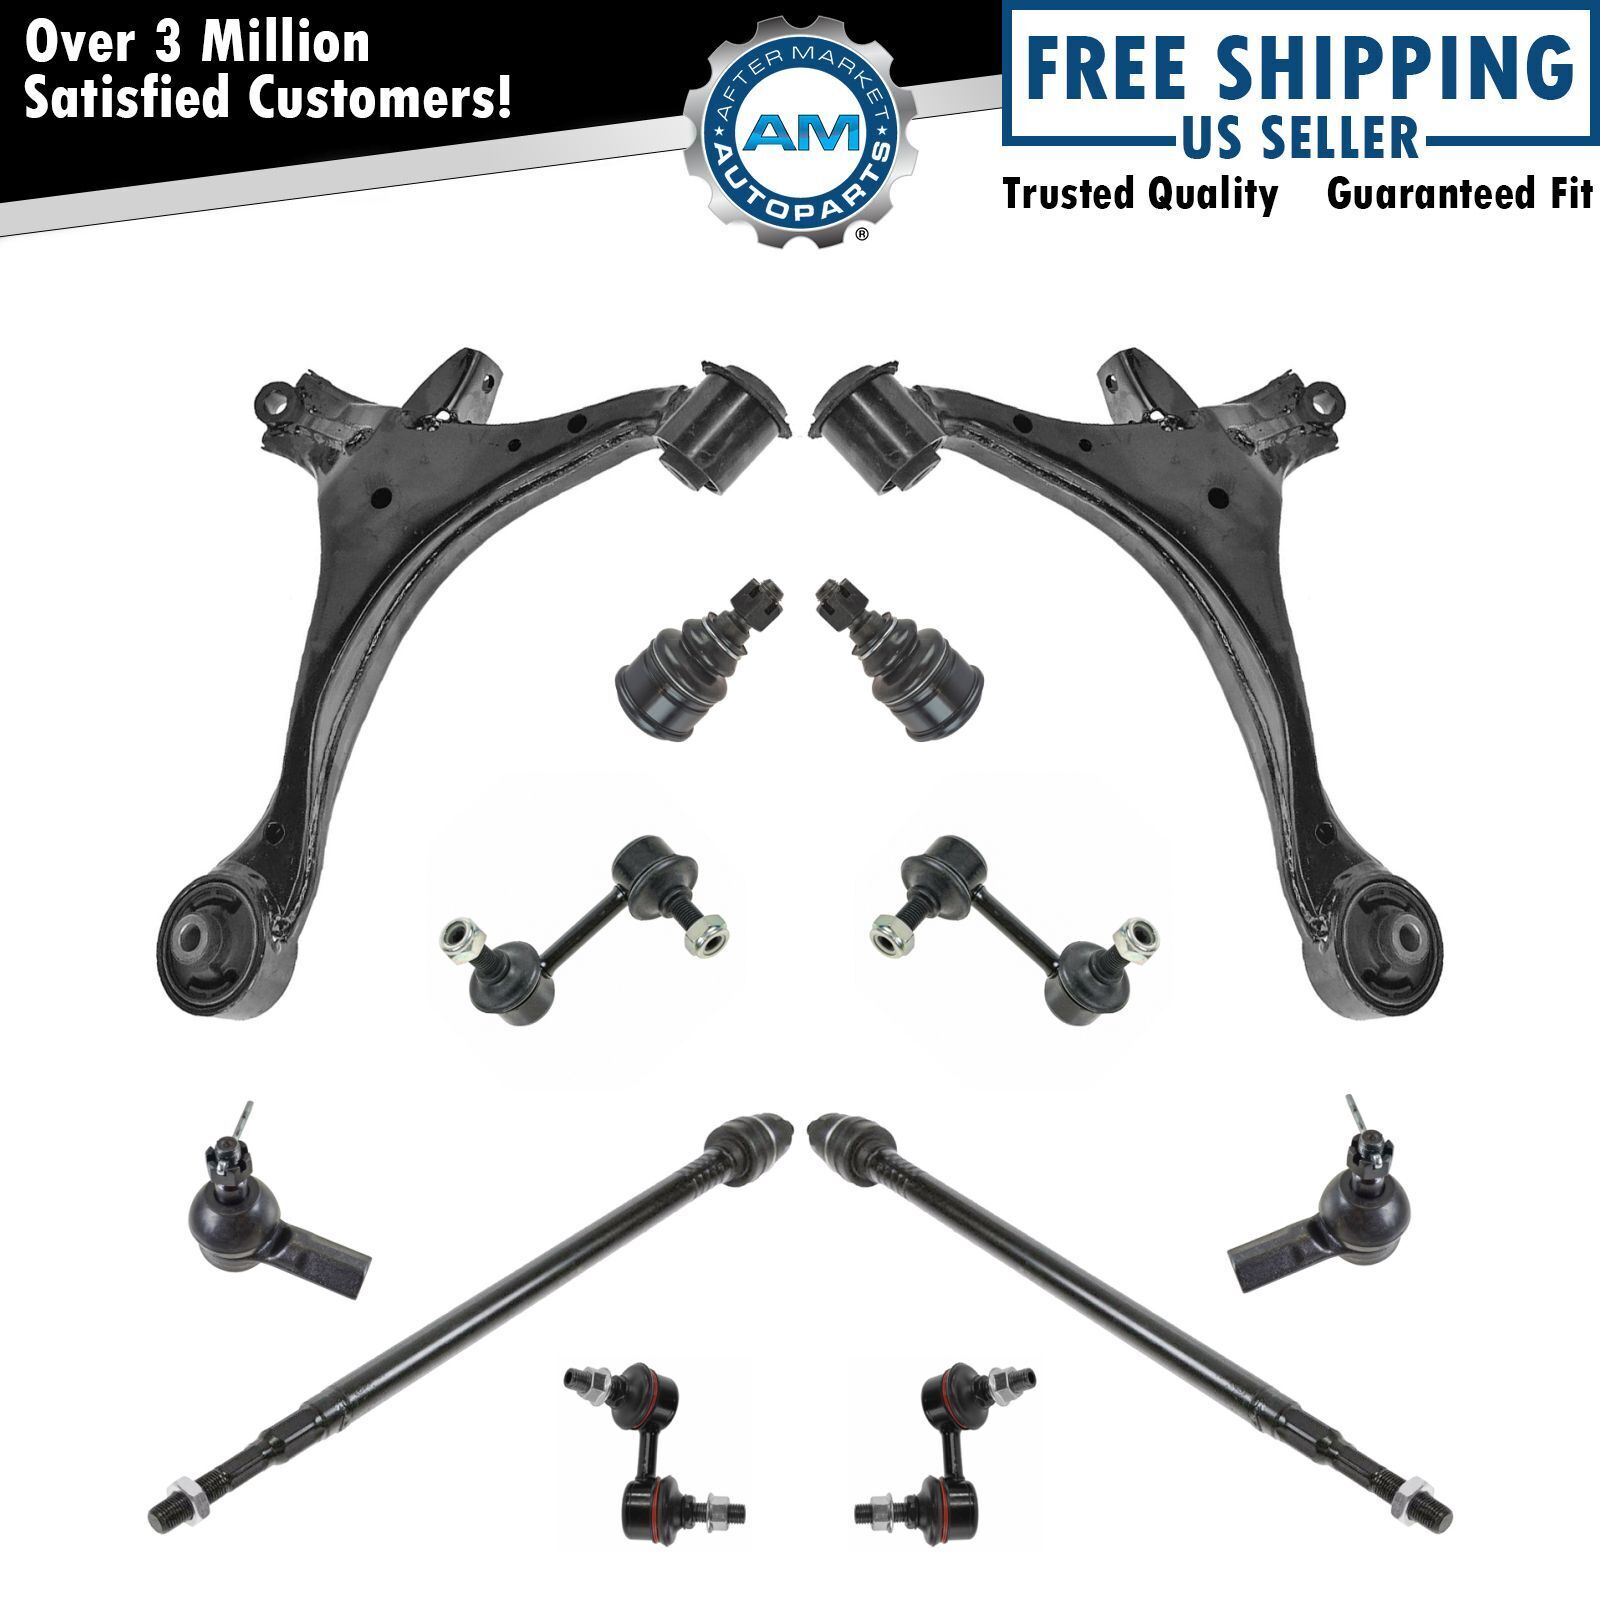 For 01 02 03 04 05 Civic Control Arm Ball Joint 12 pc Steering & Suspension Kit